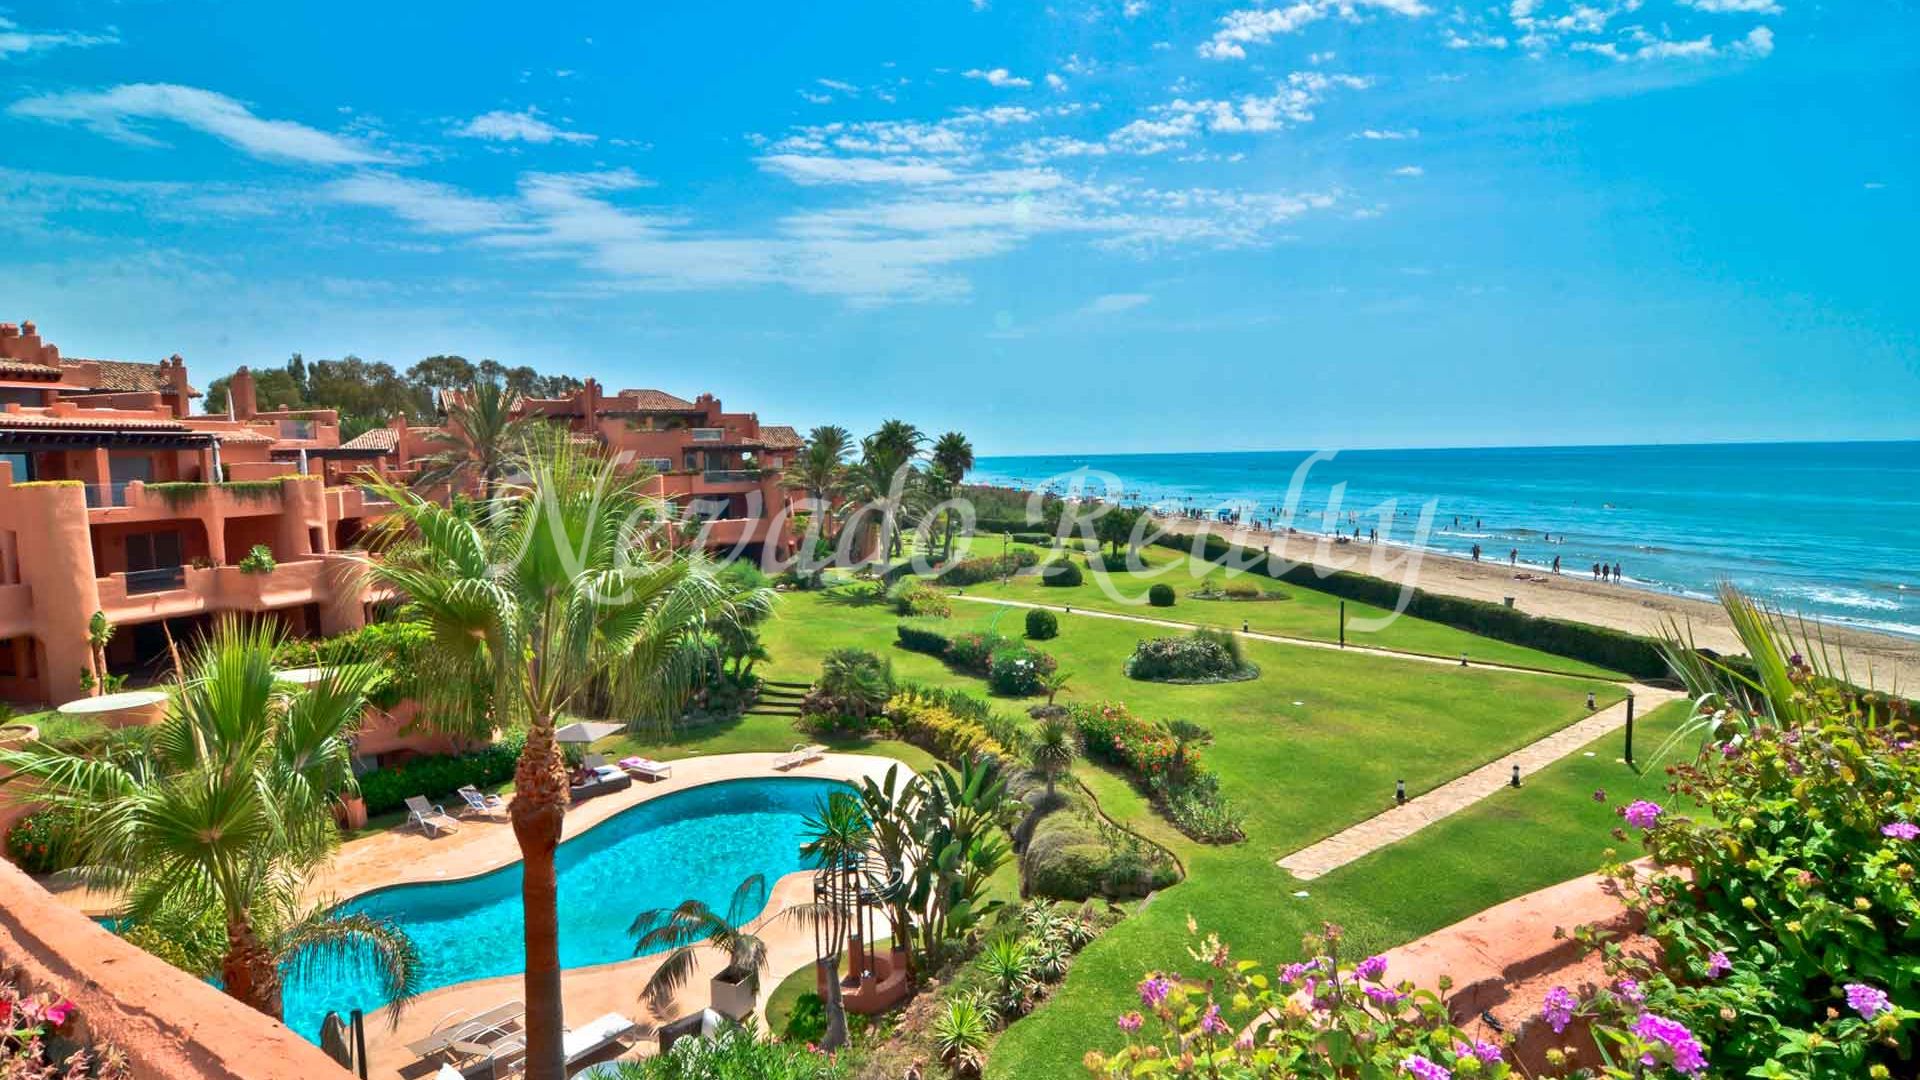 													Frontline beach Penthouse in Marbella for sale 
											